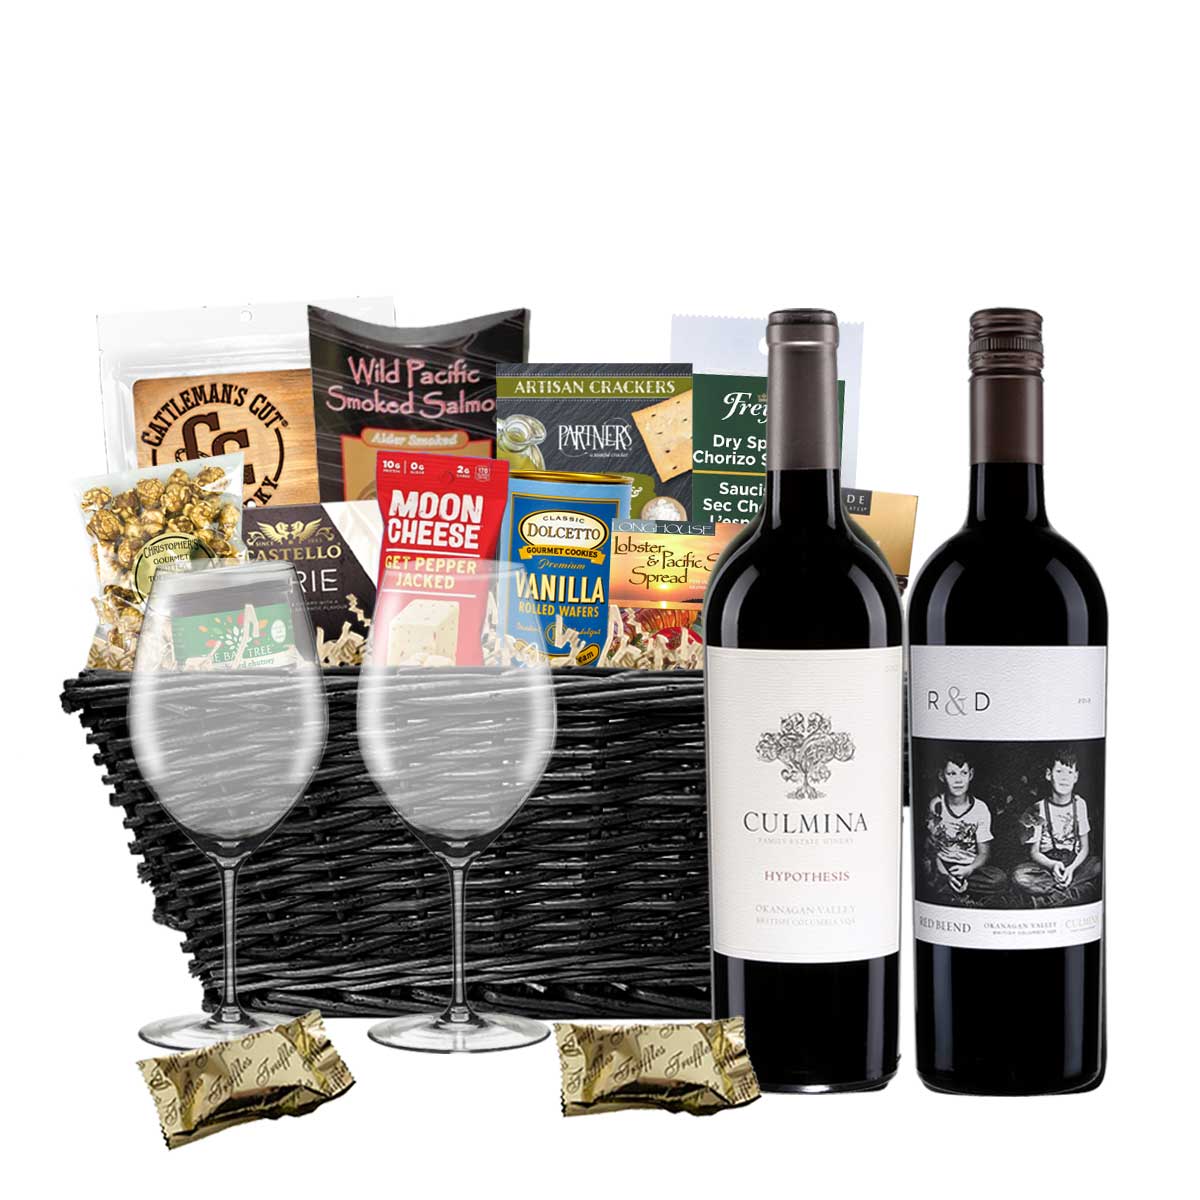 TAG Liquor Stores BC - Culmina Hypothesis & Culmina Red Blend 750ml x 2 Gift Basket